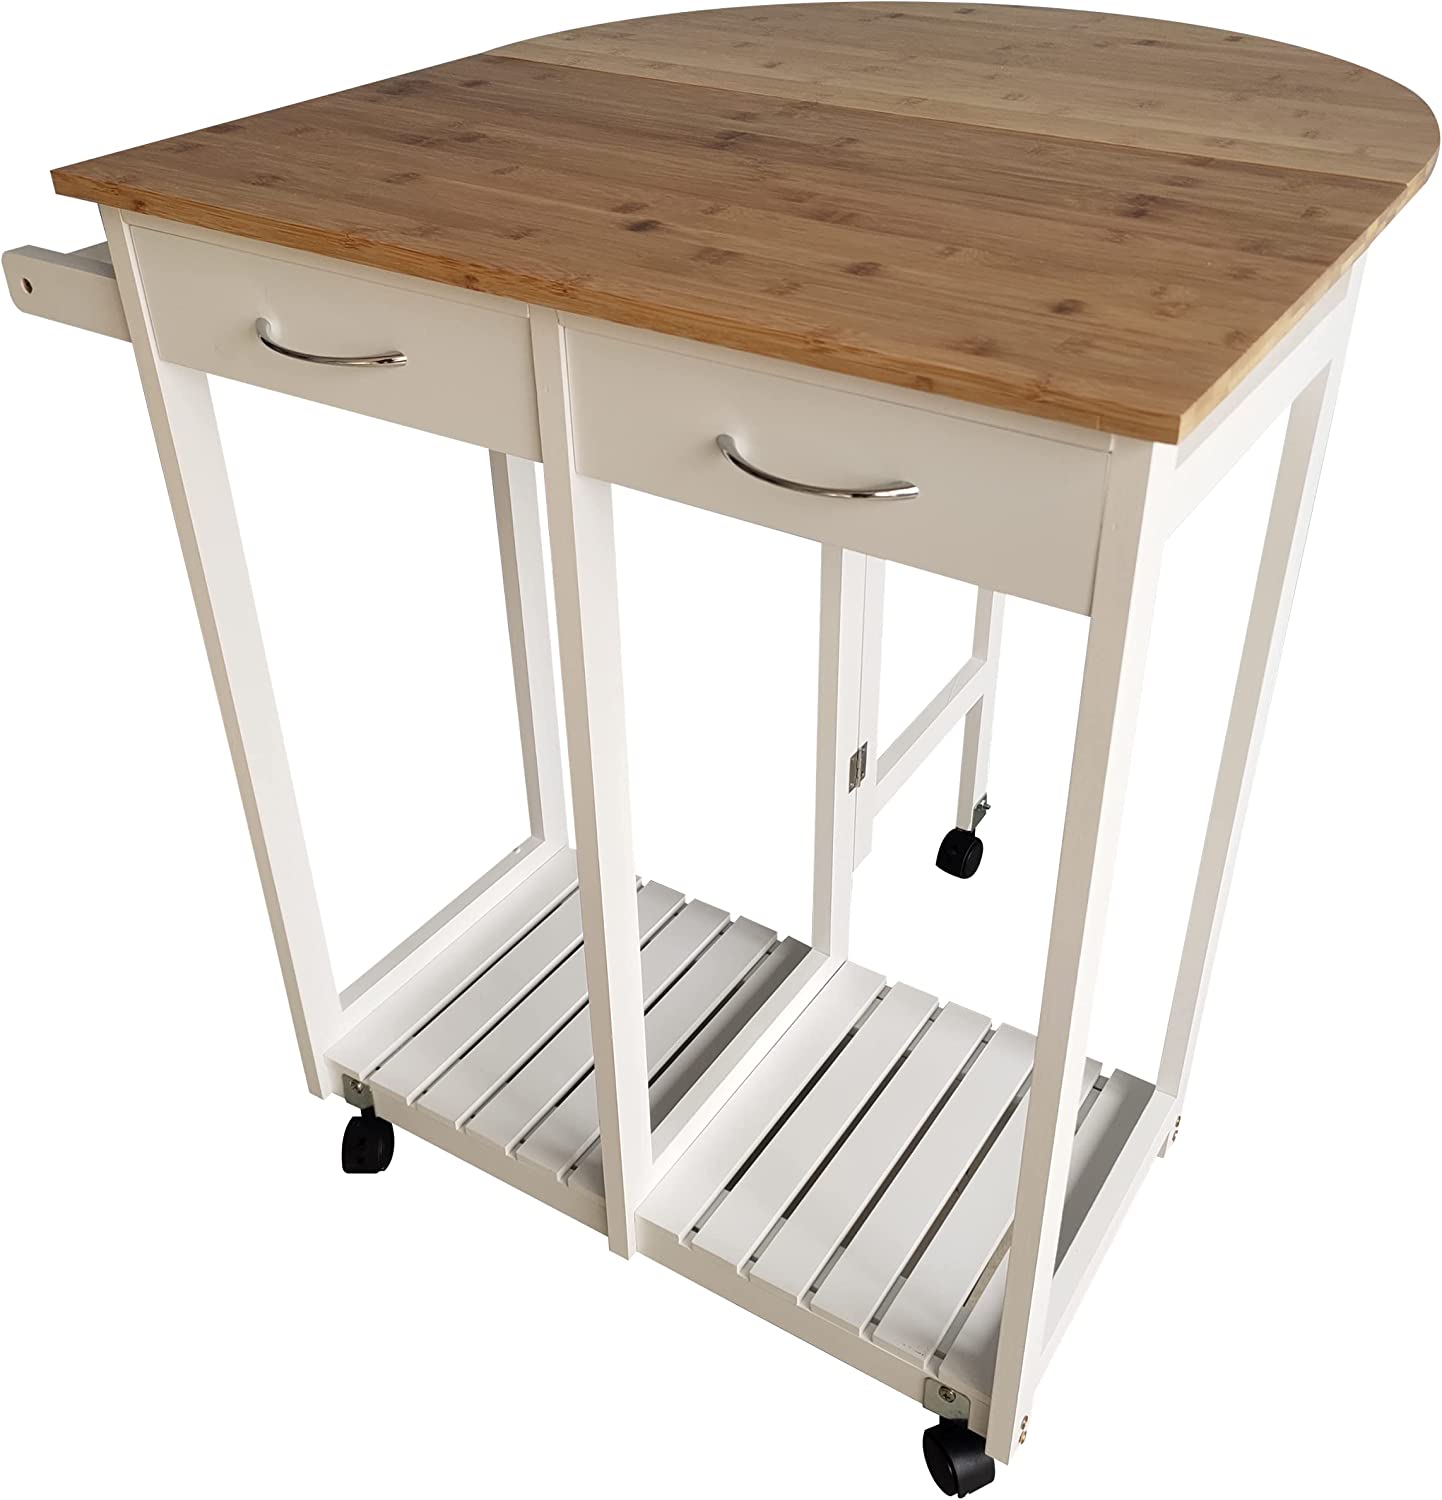 White Wooden Portable Drop Leaf Folding Rolling Kitchen Island Trolley Table Desk with Stools HYGRAD BUILT TO SURVIVE